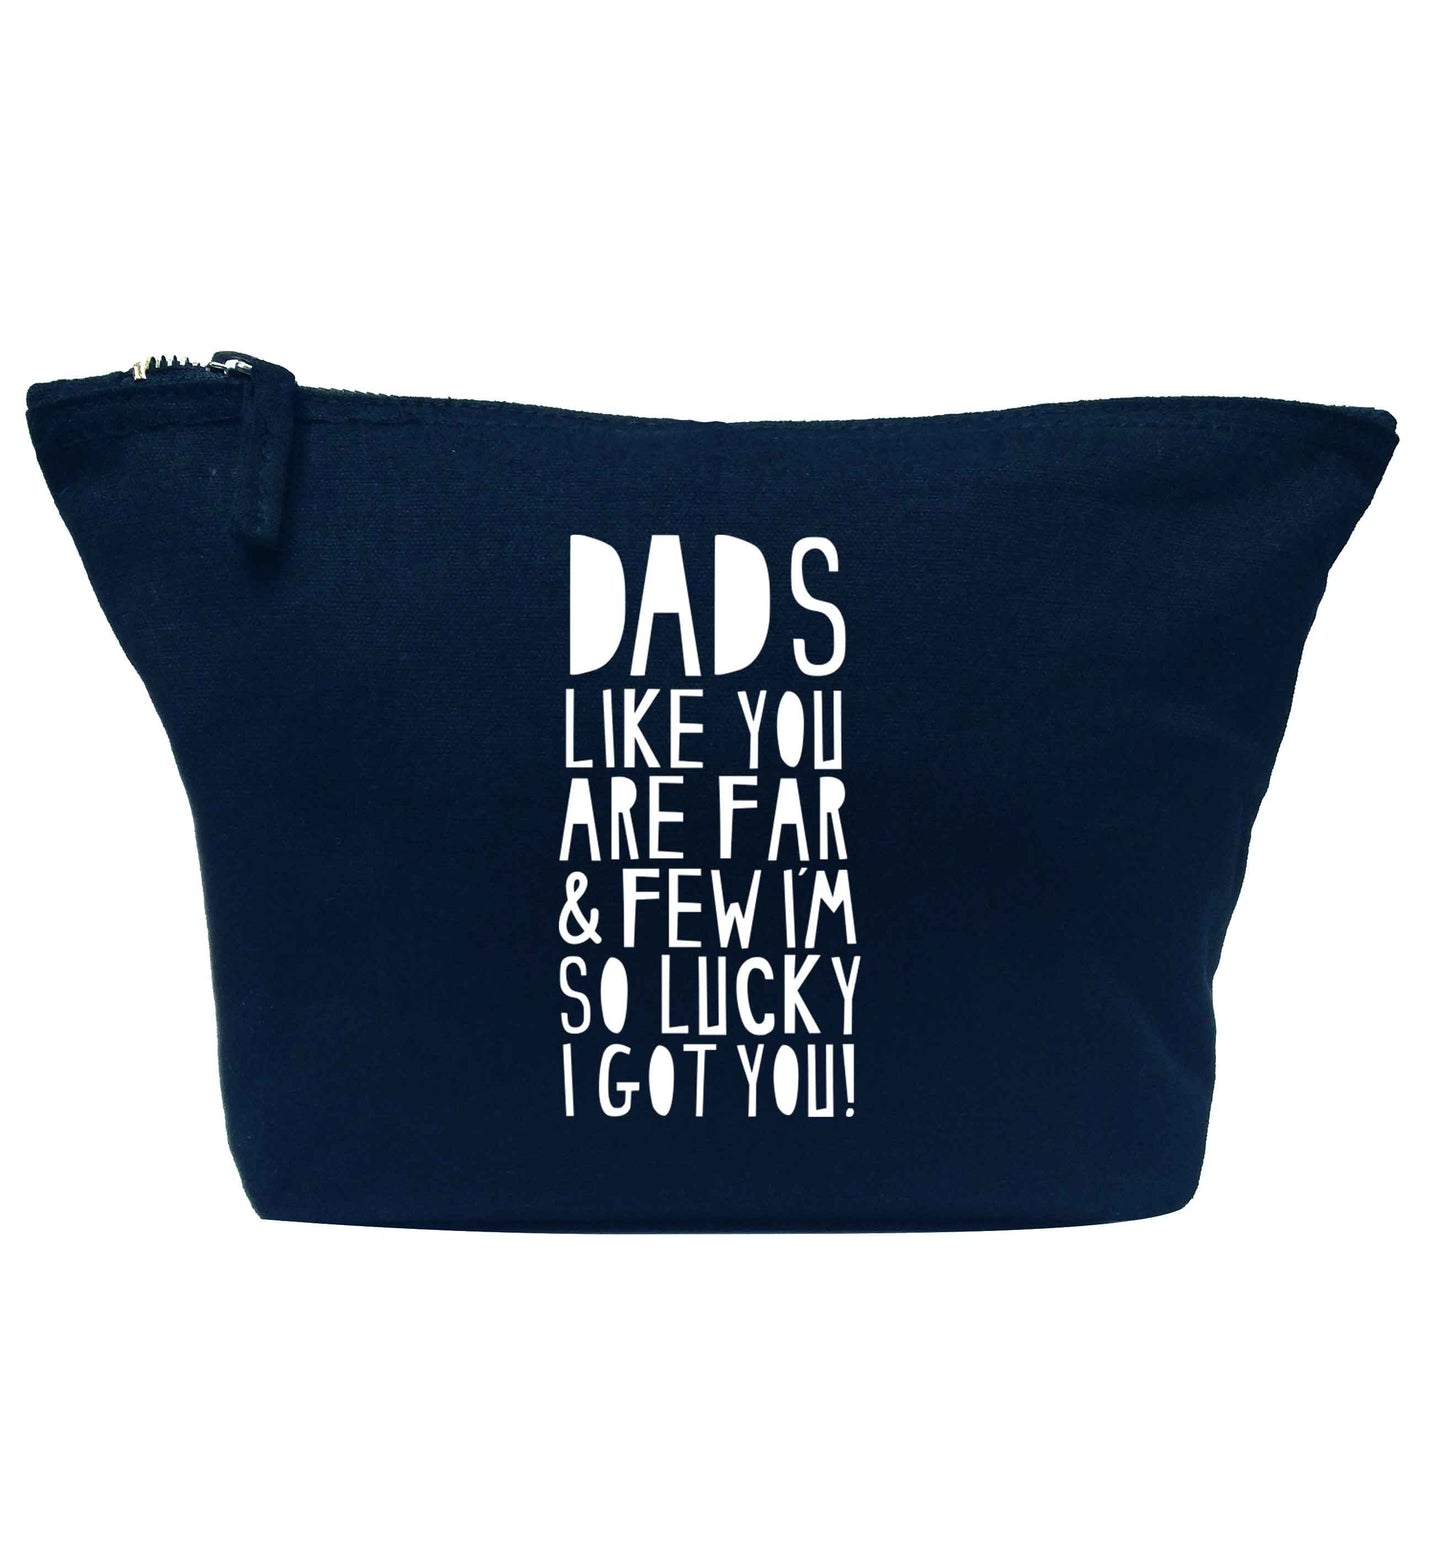 Dads like you are far and few I'm so luck I got you! navy makeup bag